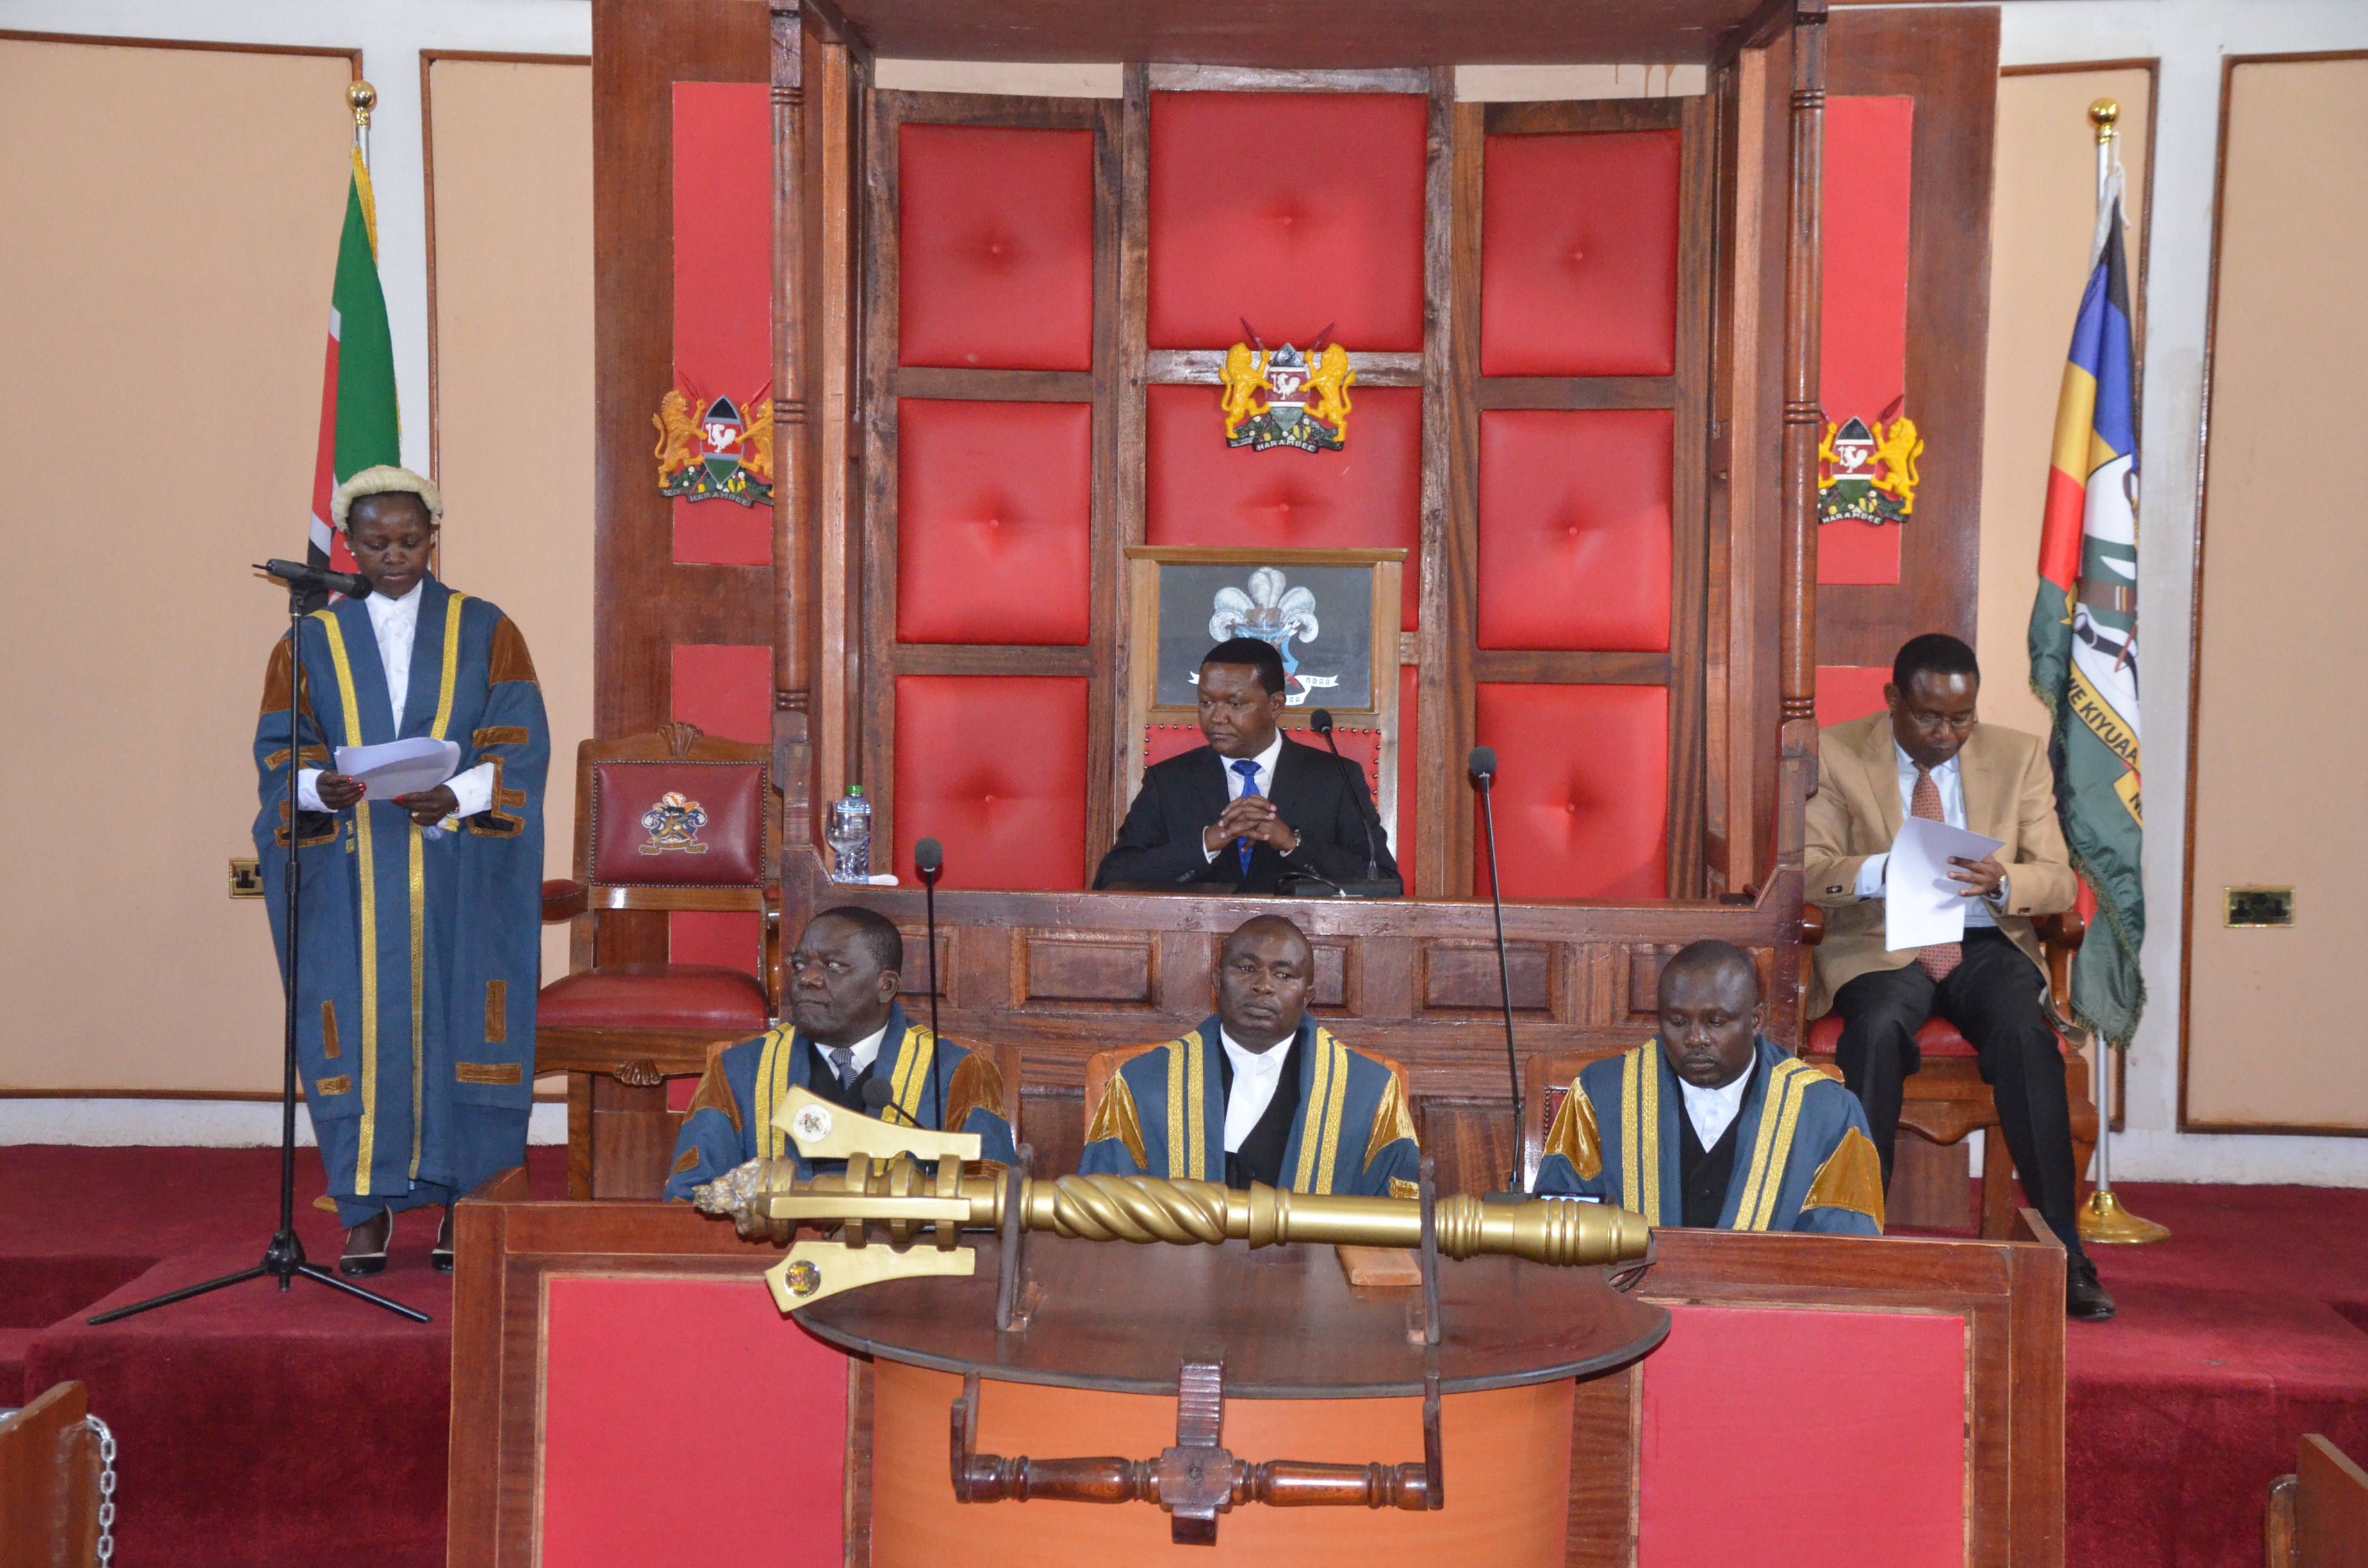 Governors Address to the house during the Opening of the Second Assembly